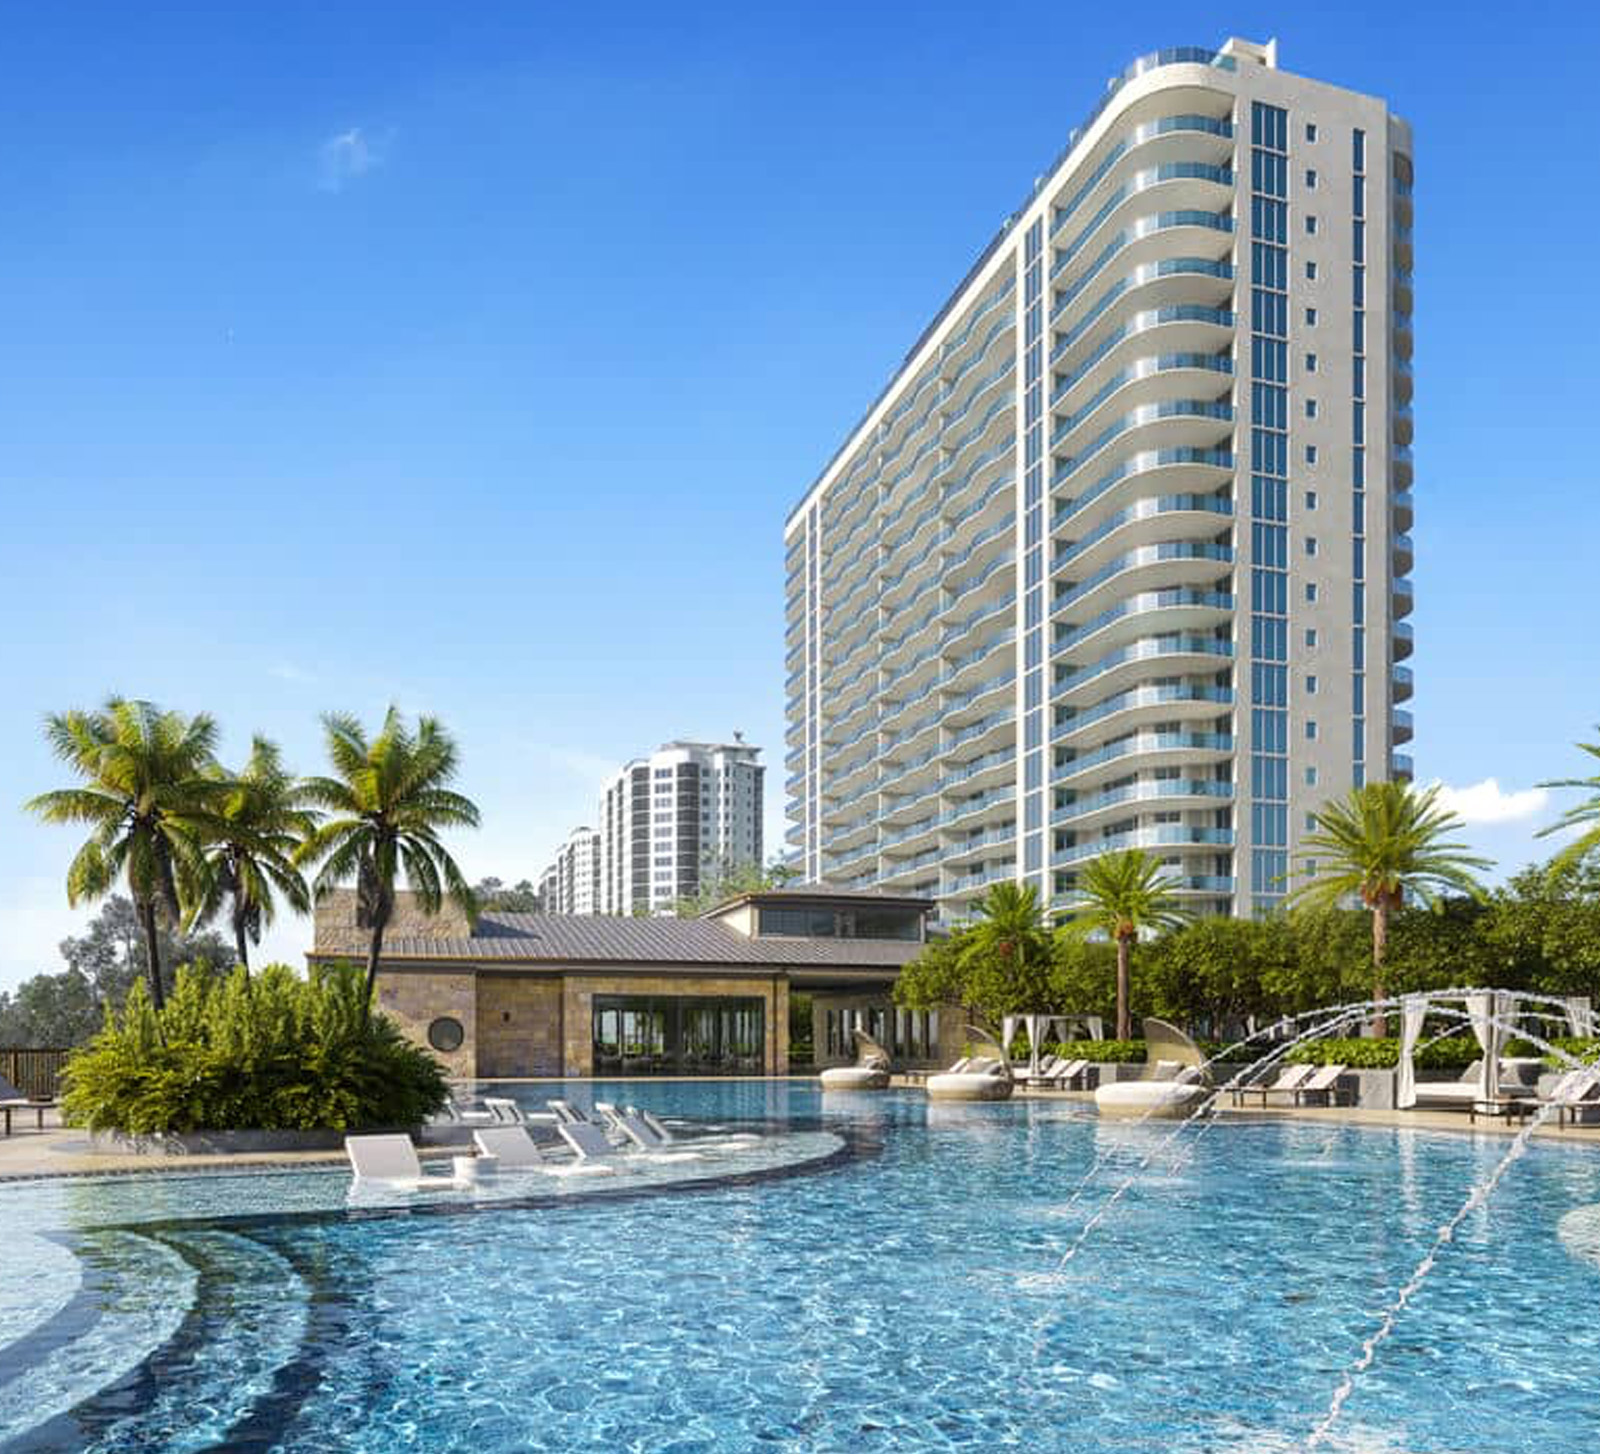 Dive into These Luxurious Pools at Infinity at The Colony